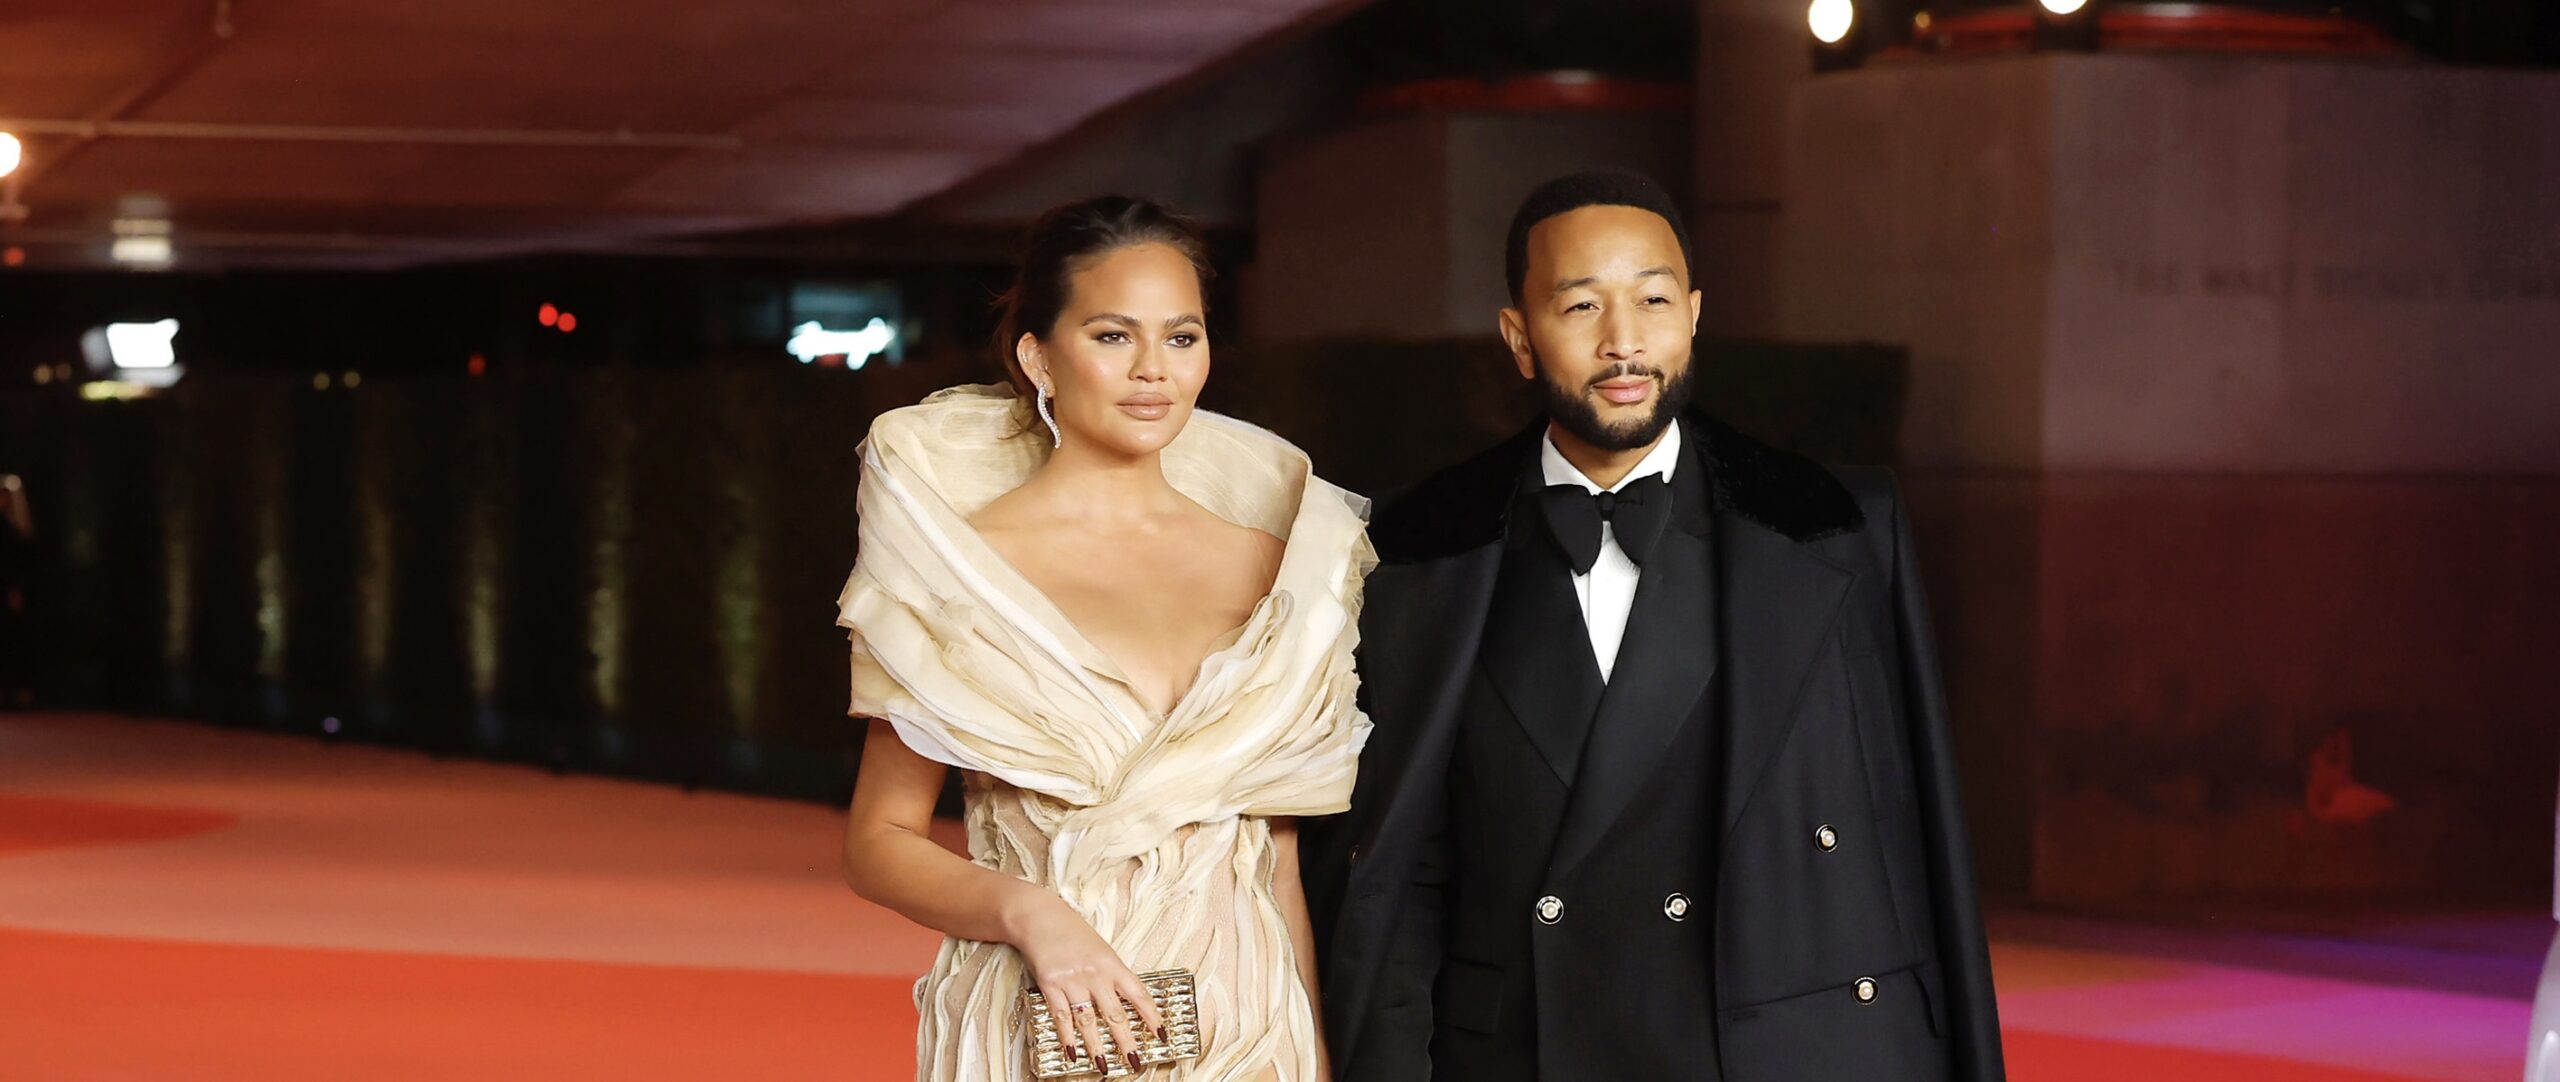 Chrissy Teigen in a stunning draped gown and John Legend in a classic black coat attend the Academy Museum of Motion Pictures Gala in Los Angeles.